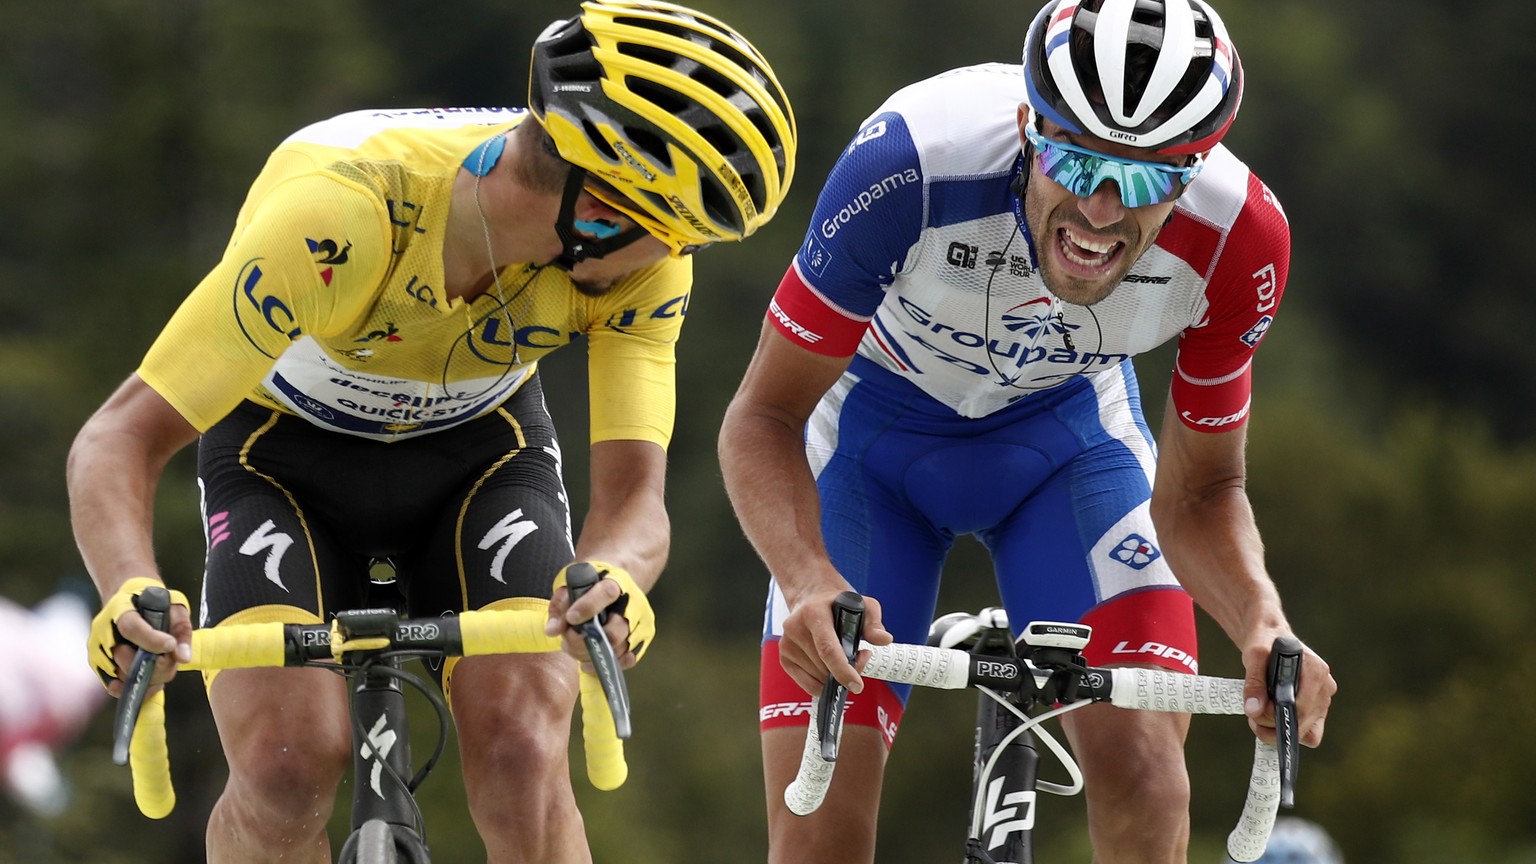 epa07710453 France&#039;s Julian Alaphilippe (L) of Deceuninck Quick Step team and France&#039;s Thibaut Pinot (R) of Groupama Fdj team cross the finish line during the 6th stage of the 106th edition  ...